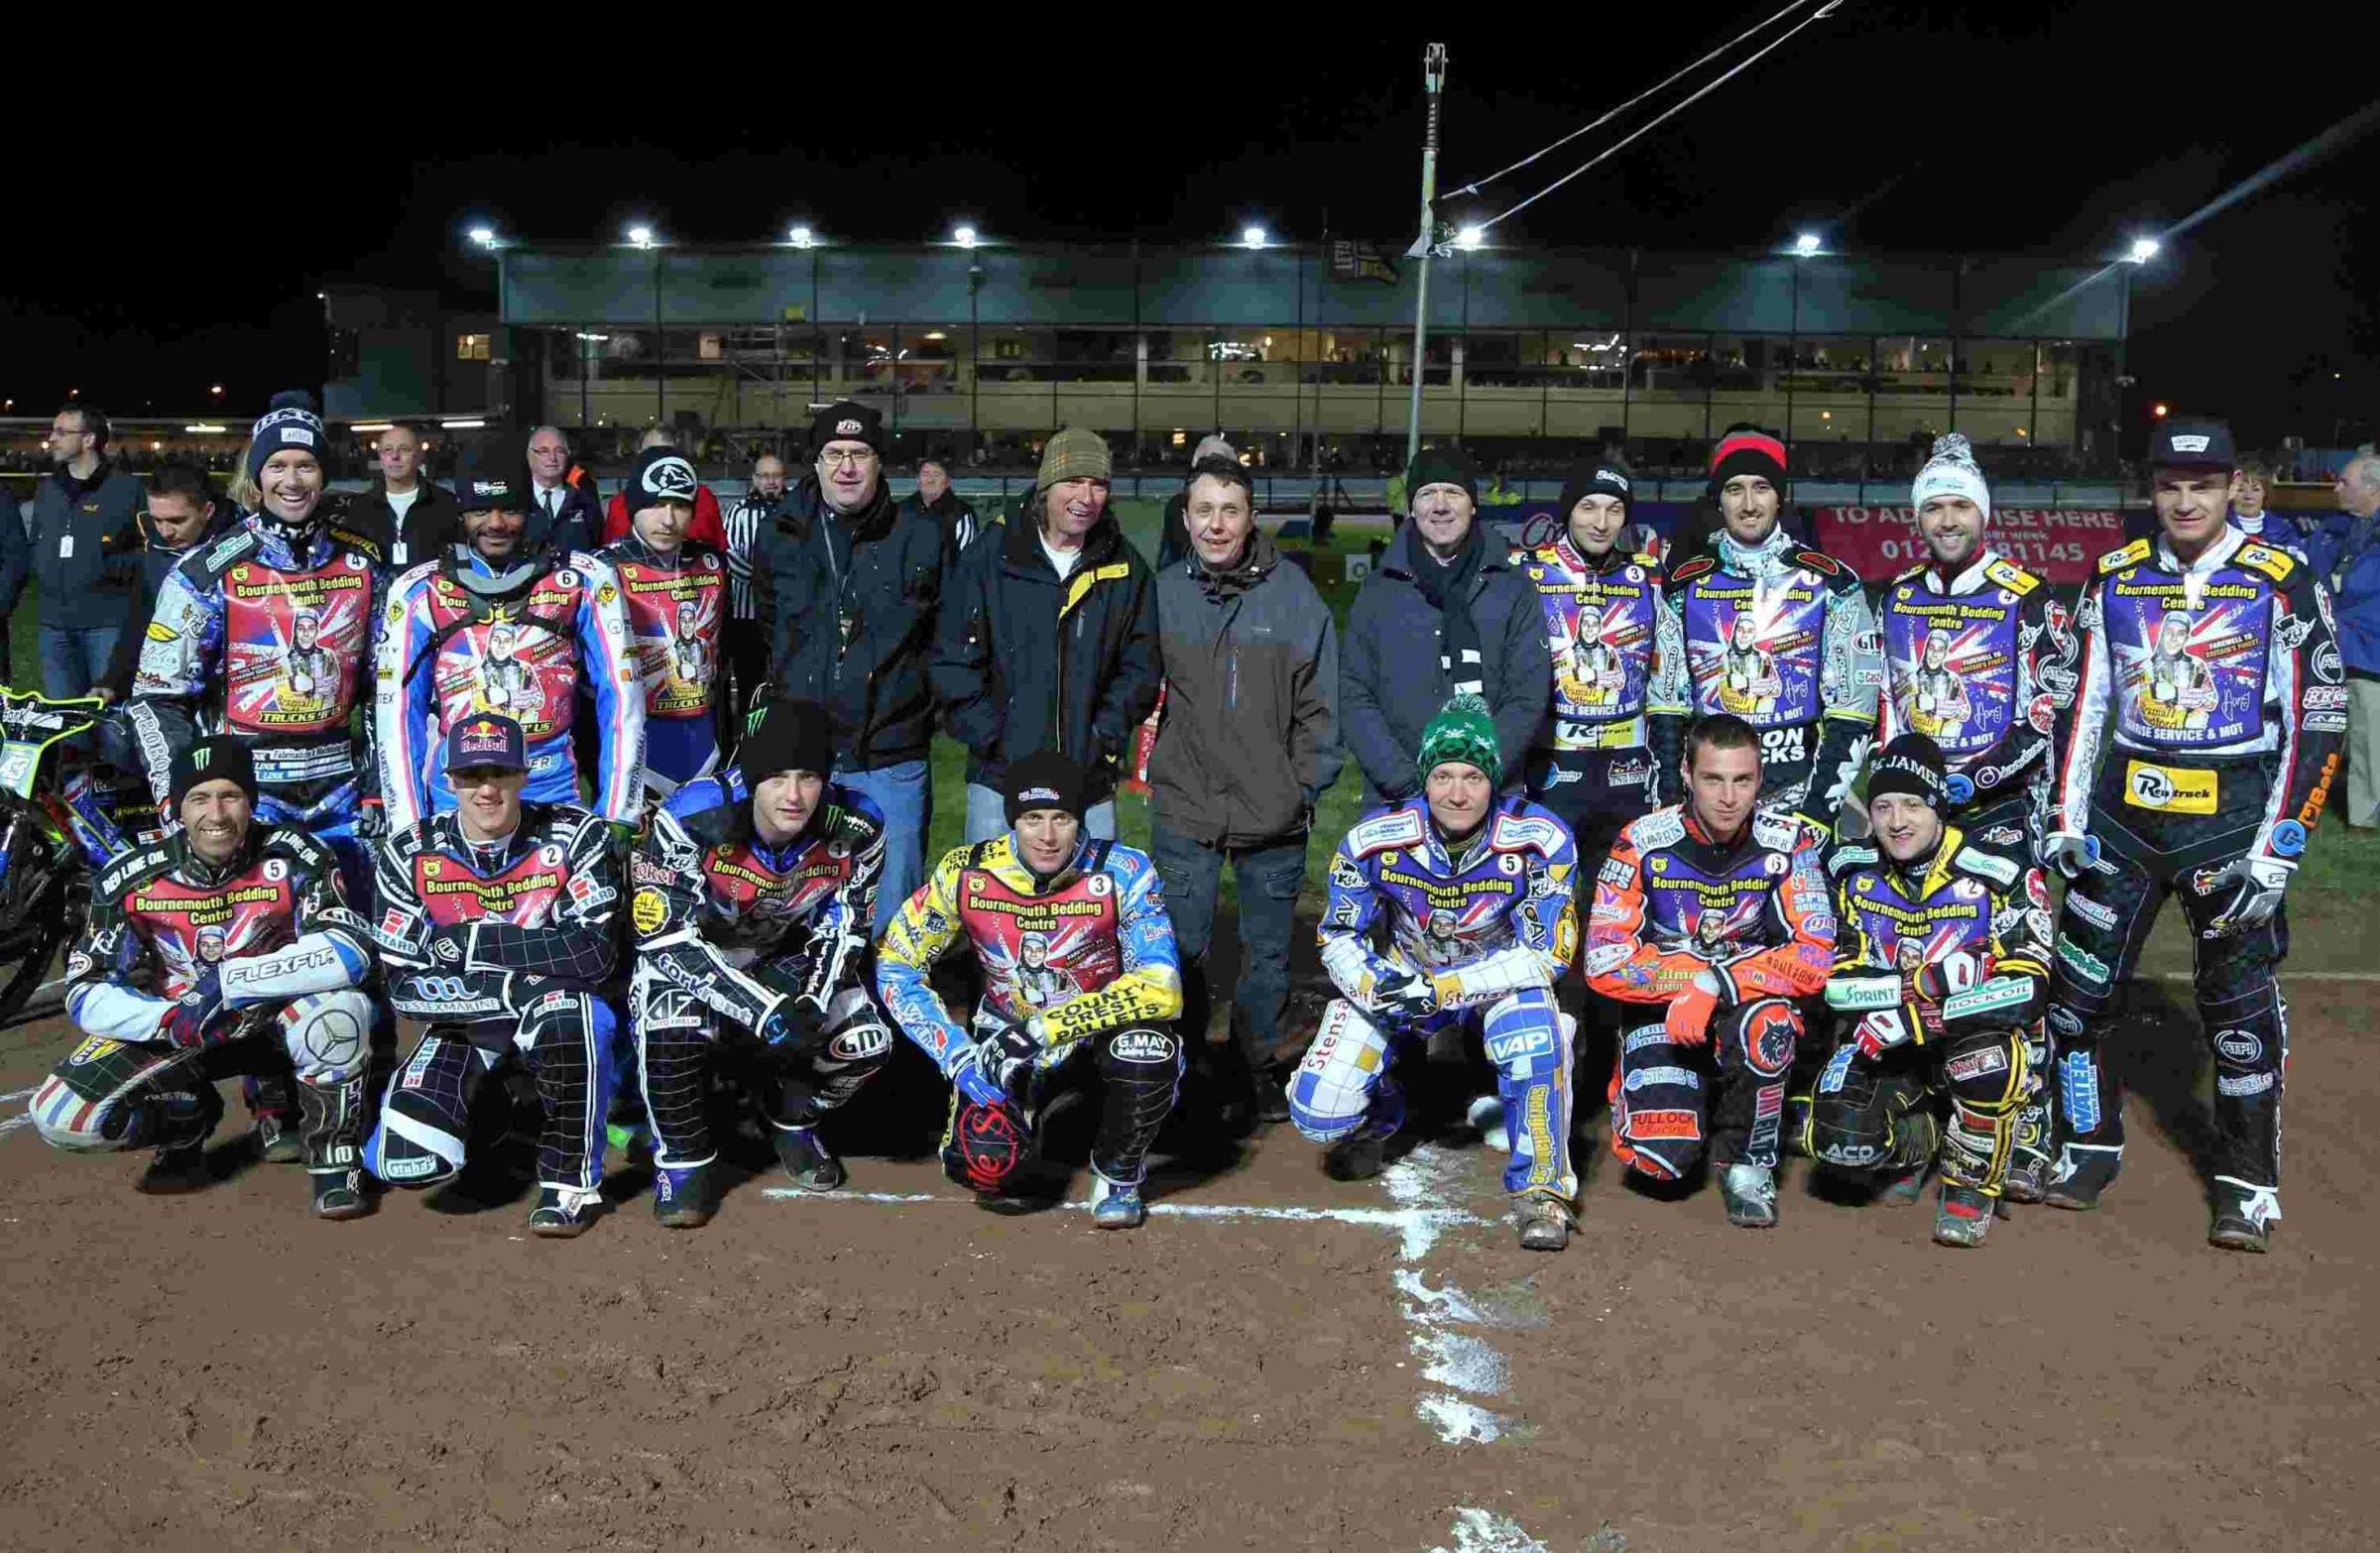 Picture by Richard Crease - 21/03/14 - RC210314sSpeedHave23 - sport - Speedway - Gary Havelocks farewell meeting at Poole stadium. Gary Havelock with the two teams of top riders that took part in the meeting